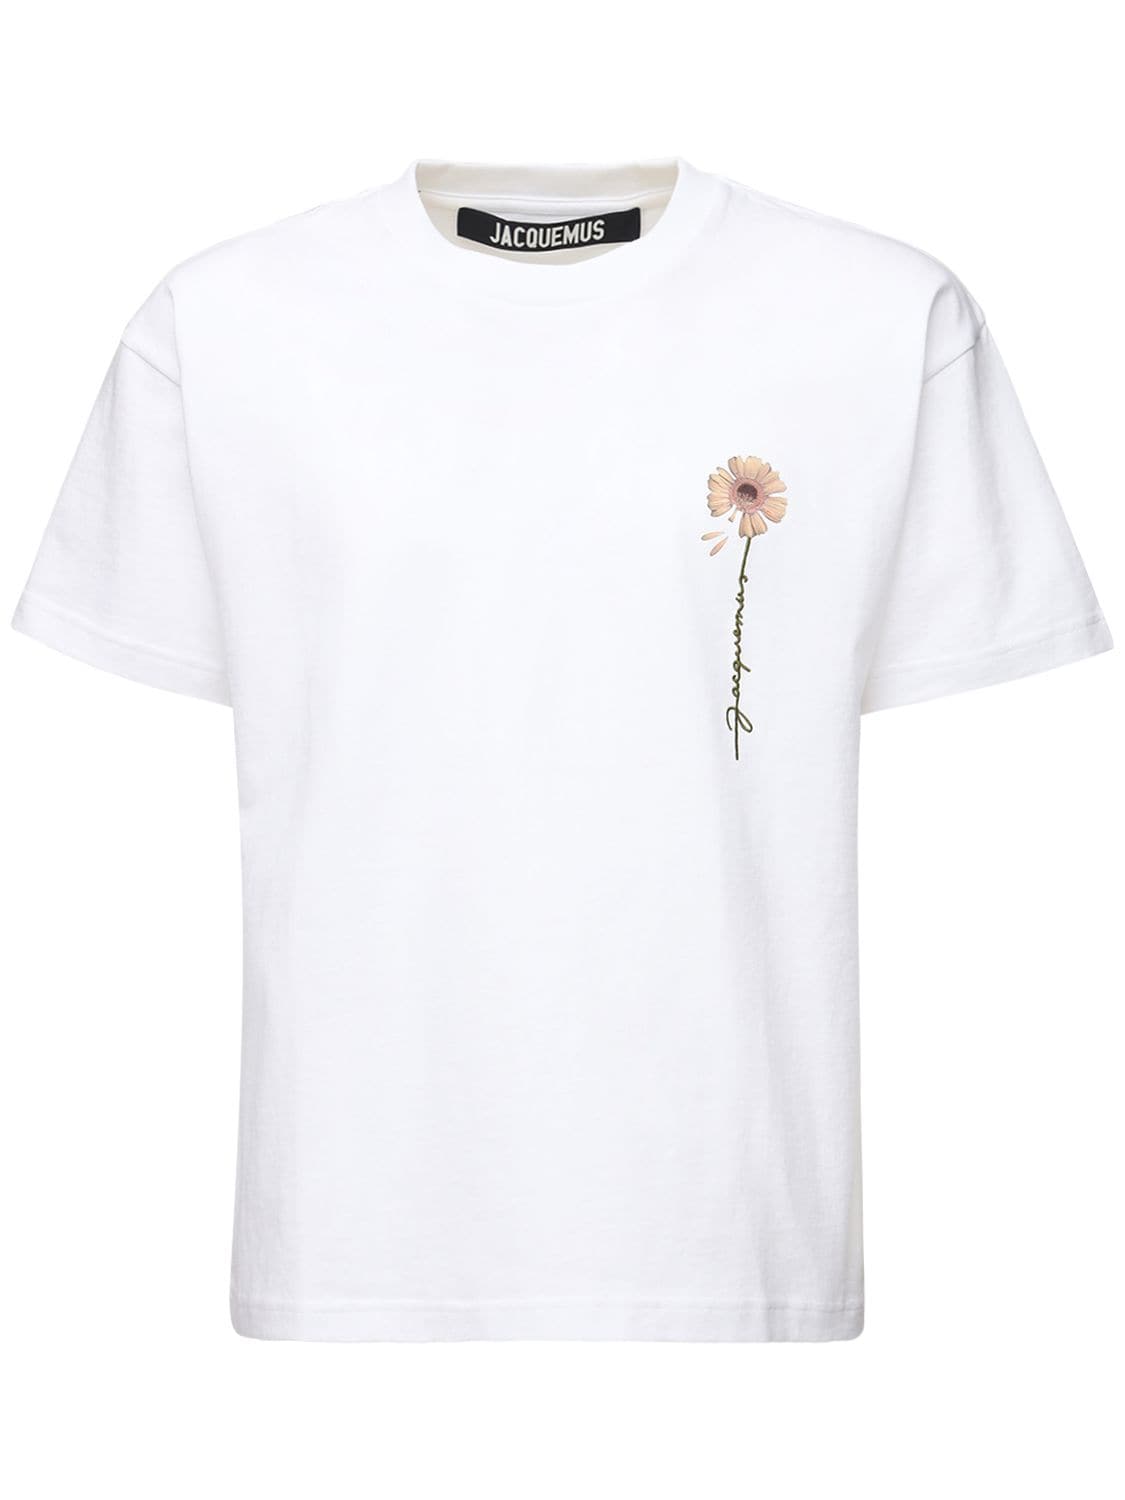 Jacquemus Embroidered Cotton Jersey T-shirt In White